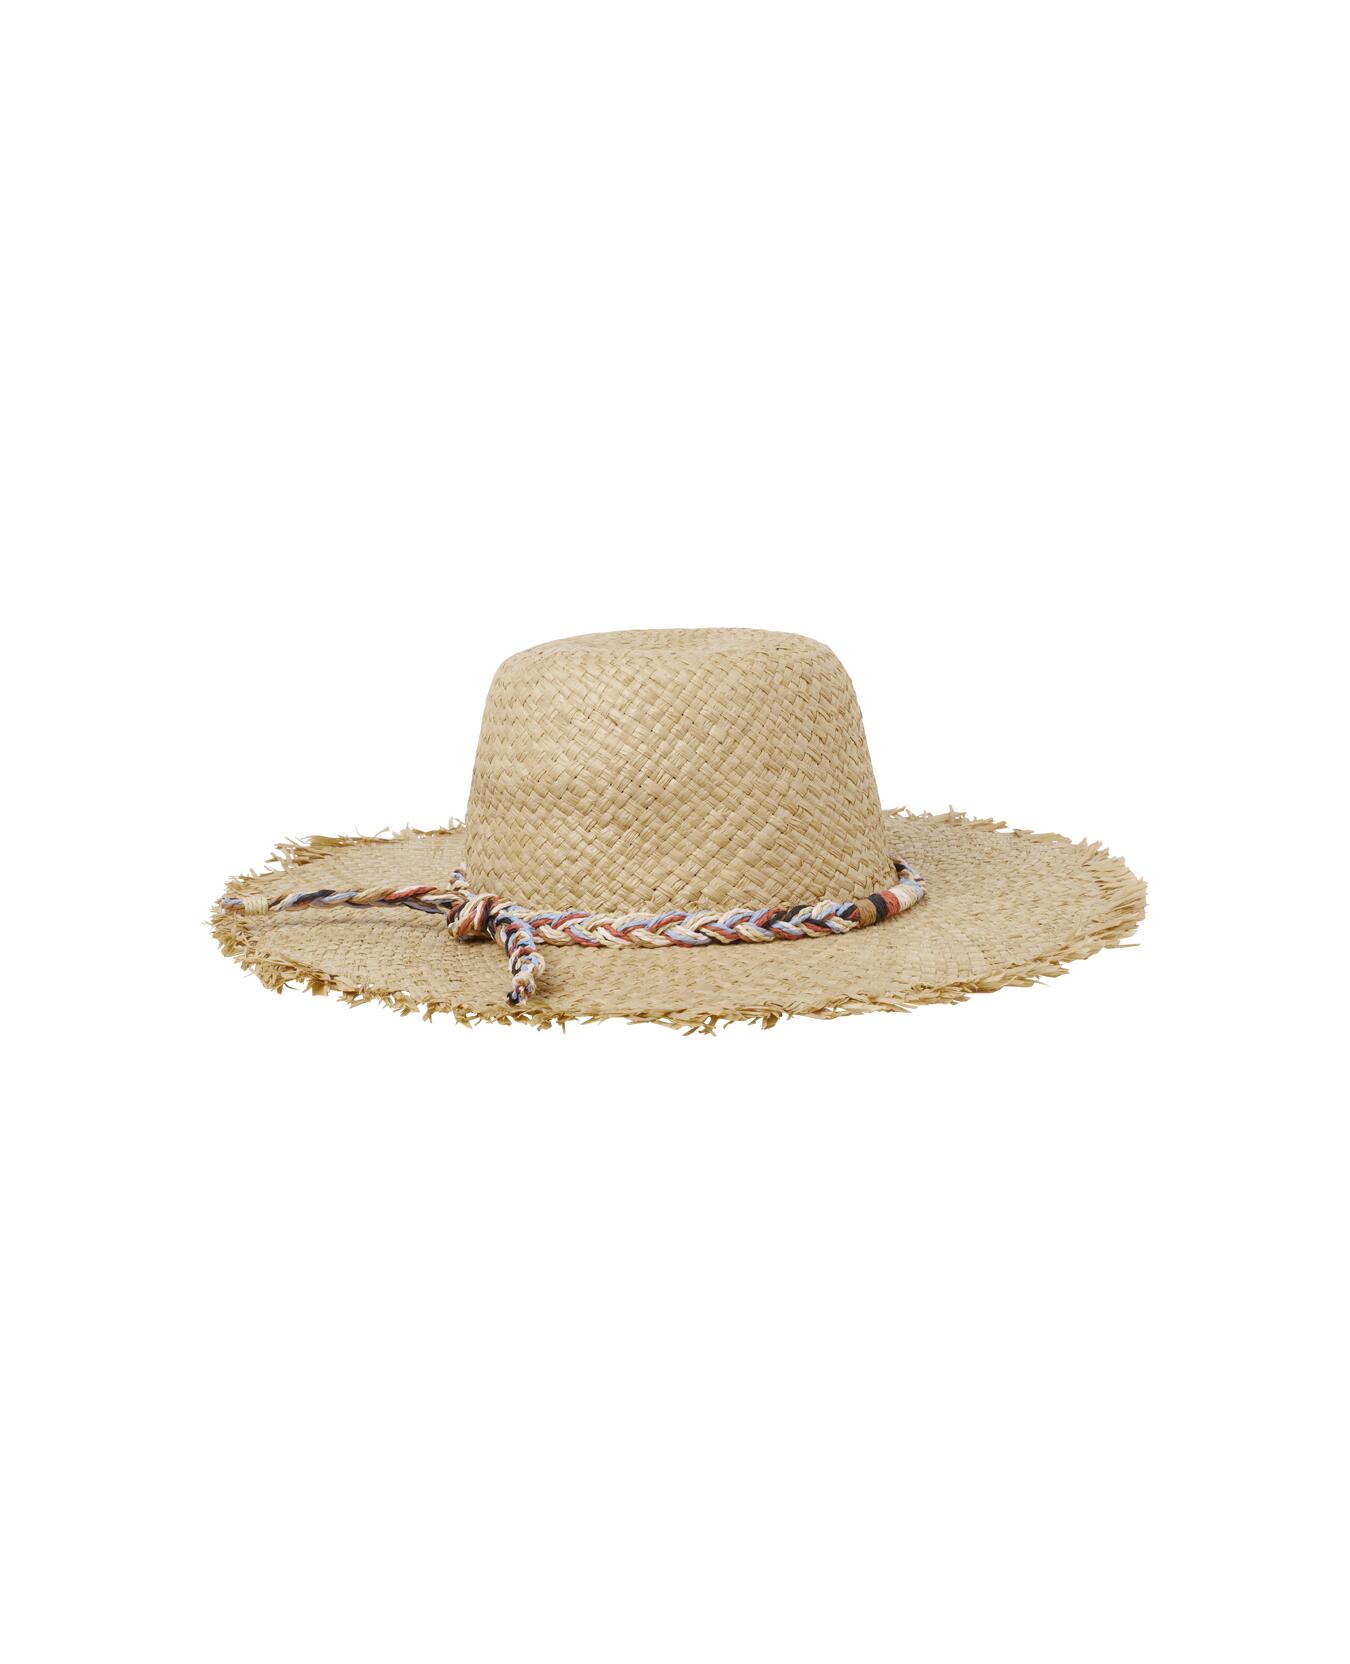 Unmade Straw Hat